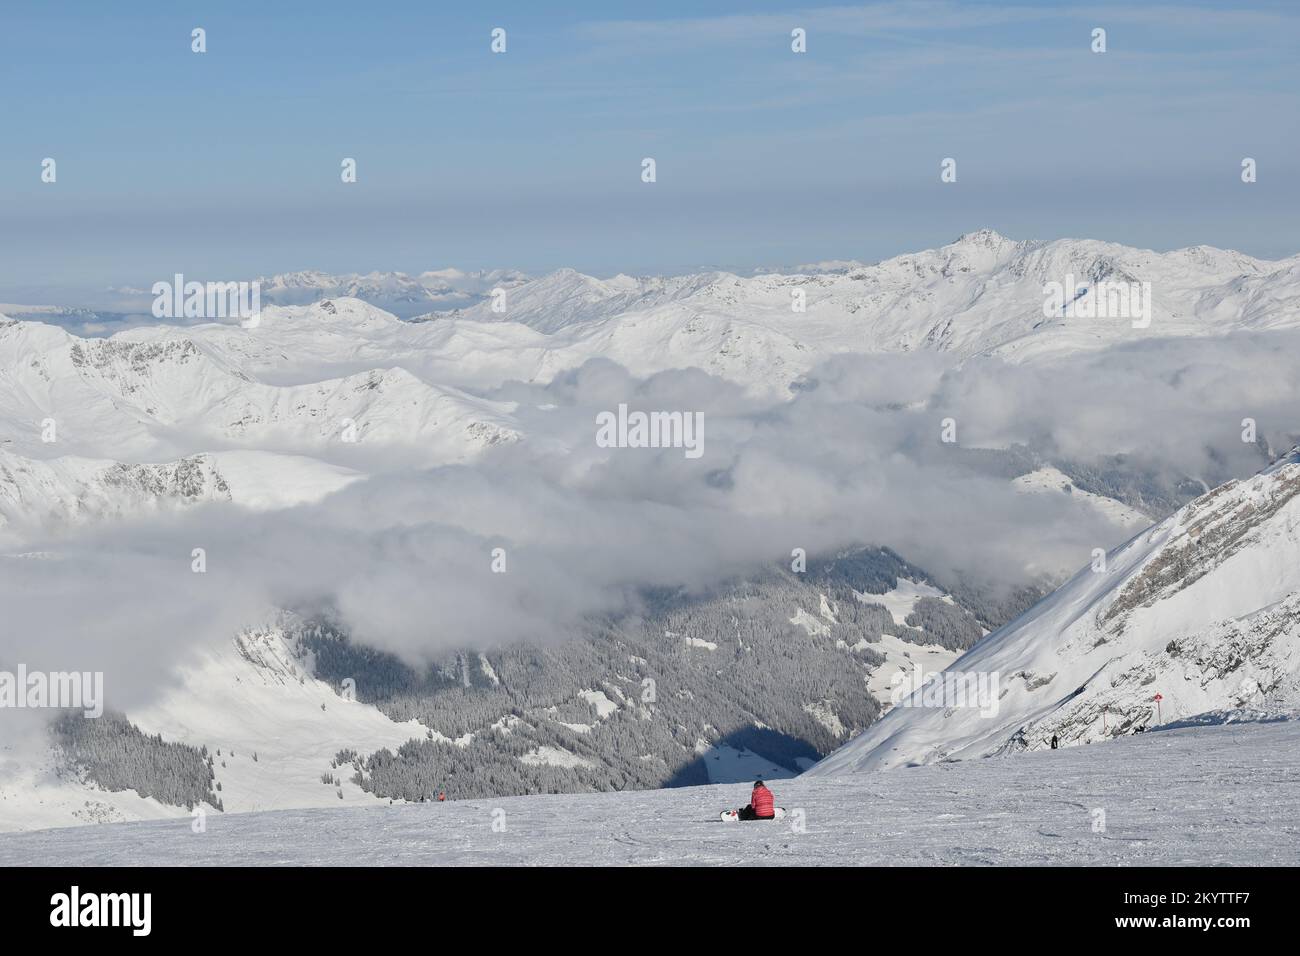 Lonely snowboarder sitting on a snow while looking at winter covered mountains in the background Stock Photo